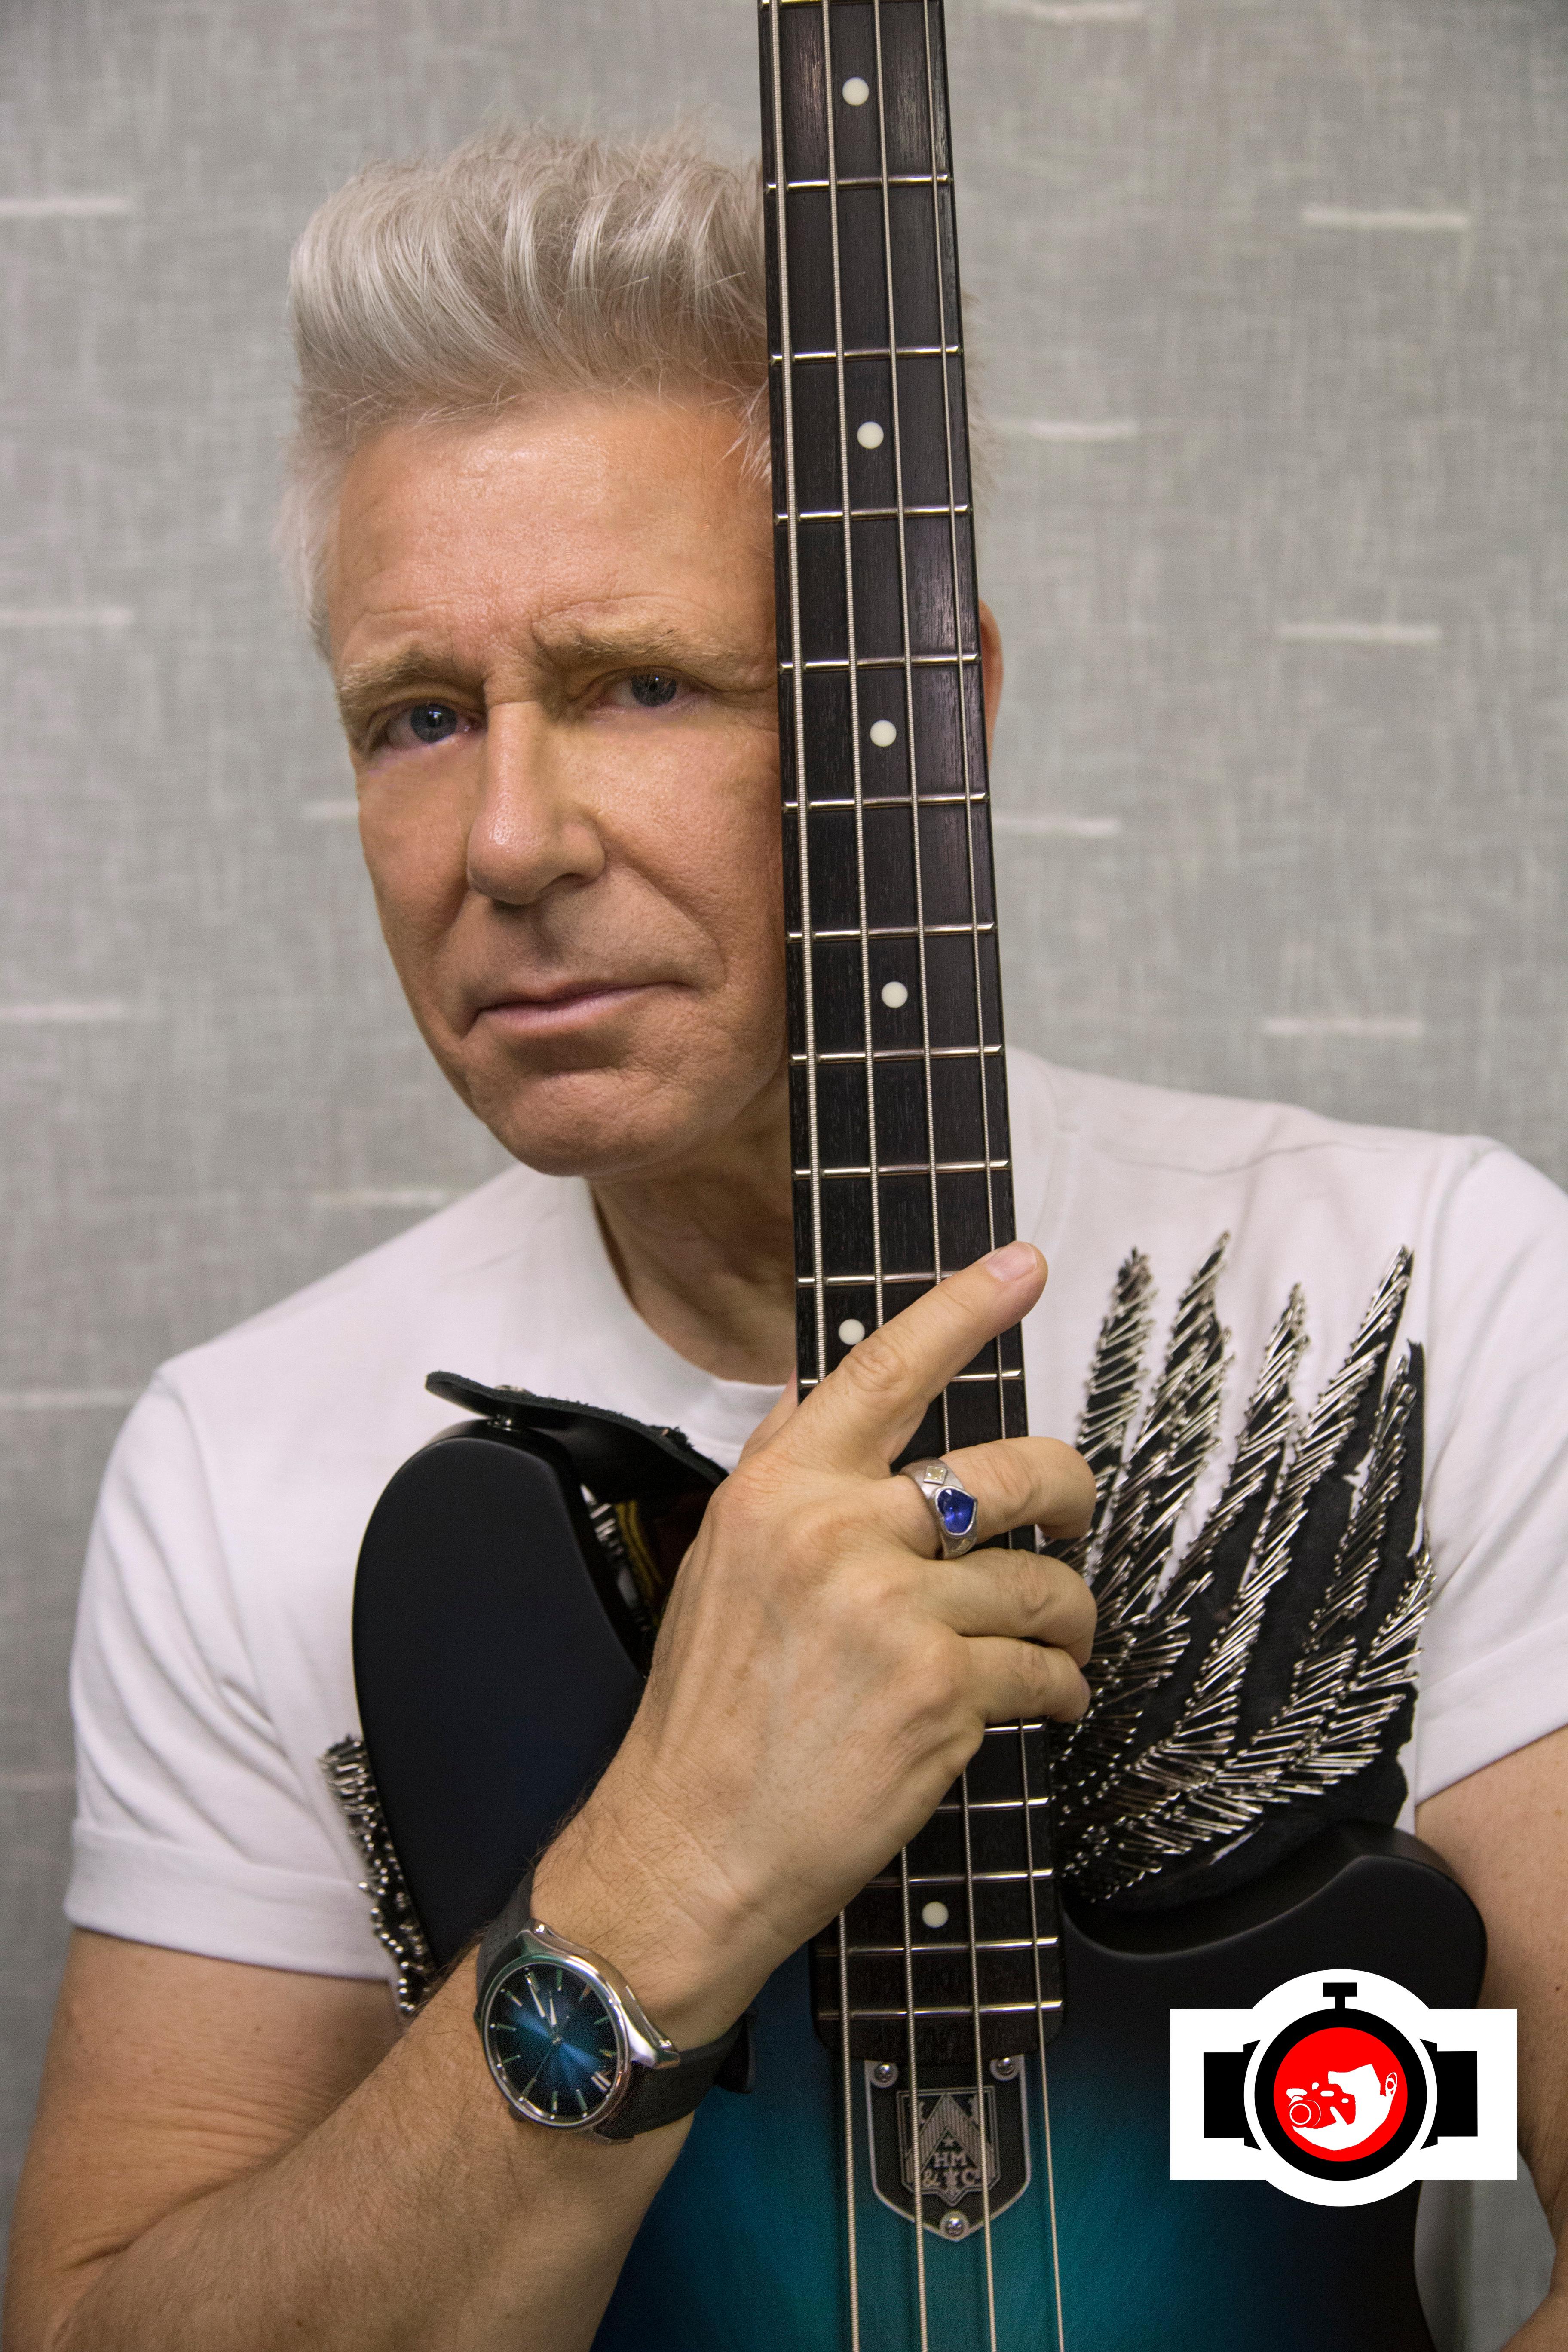 musician Adam Clayton spotted wearing a H. Moser & Cie 3200-1201